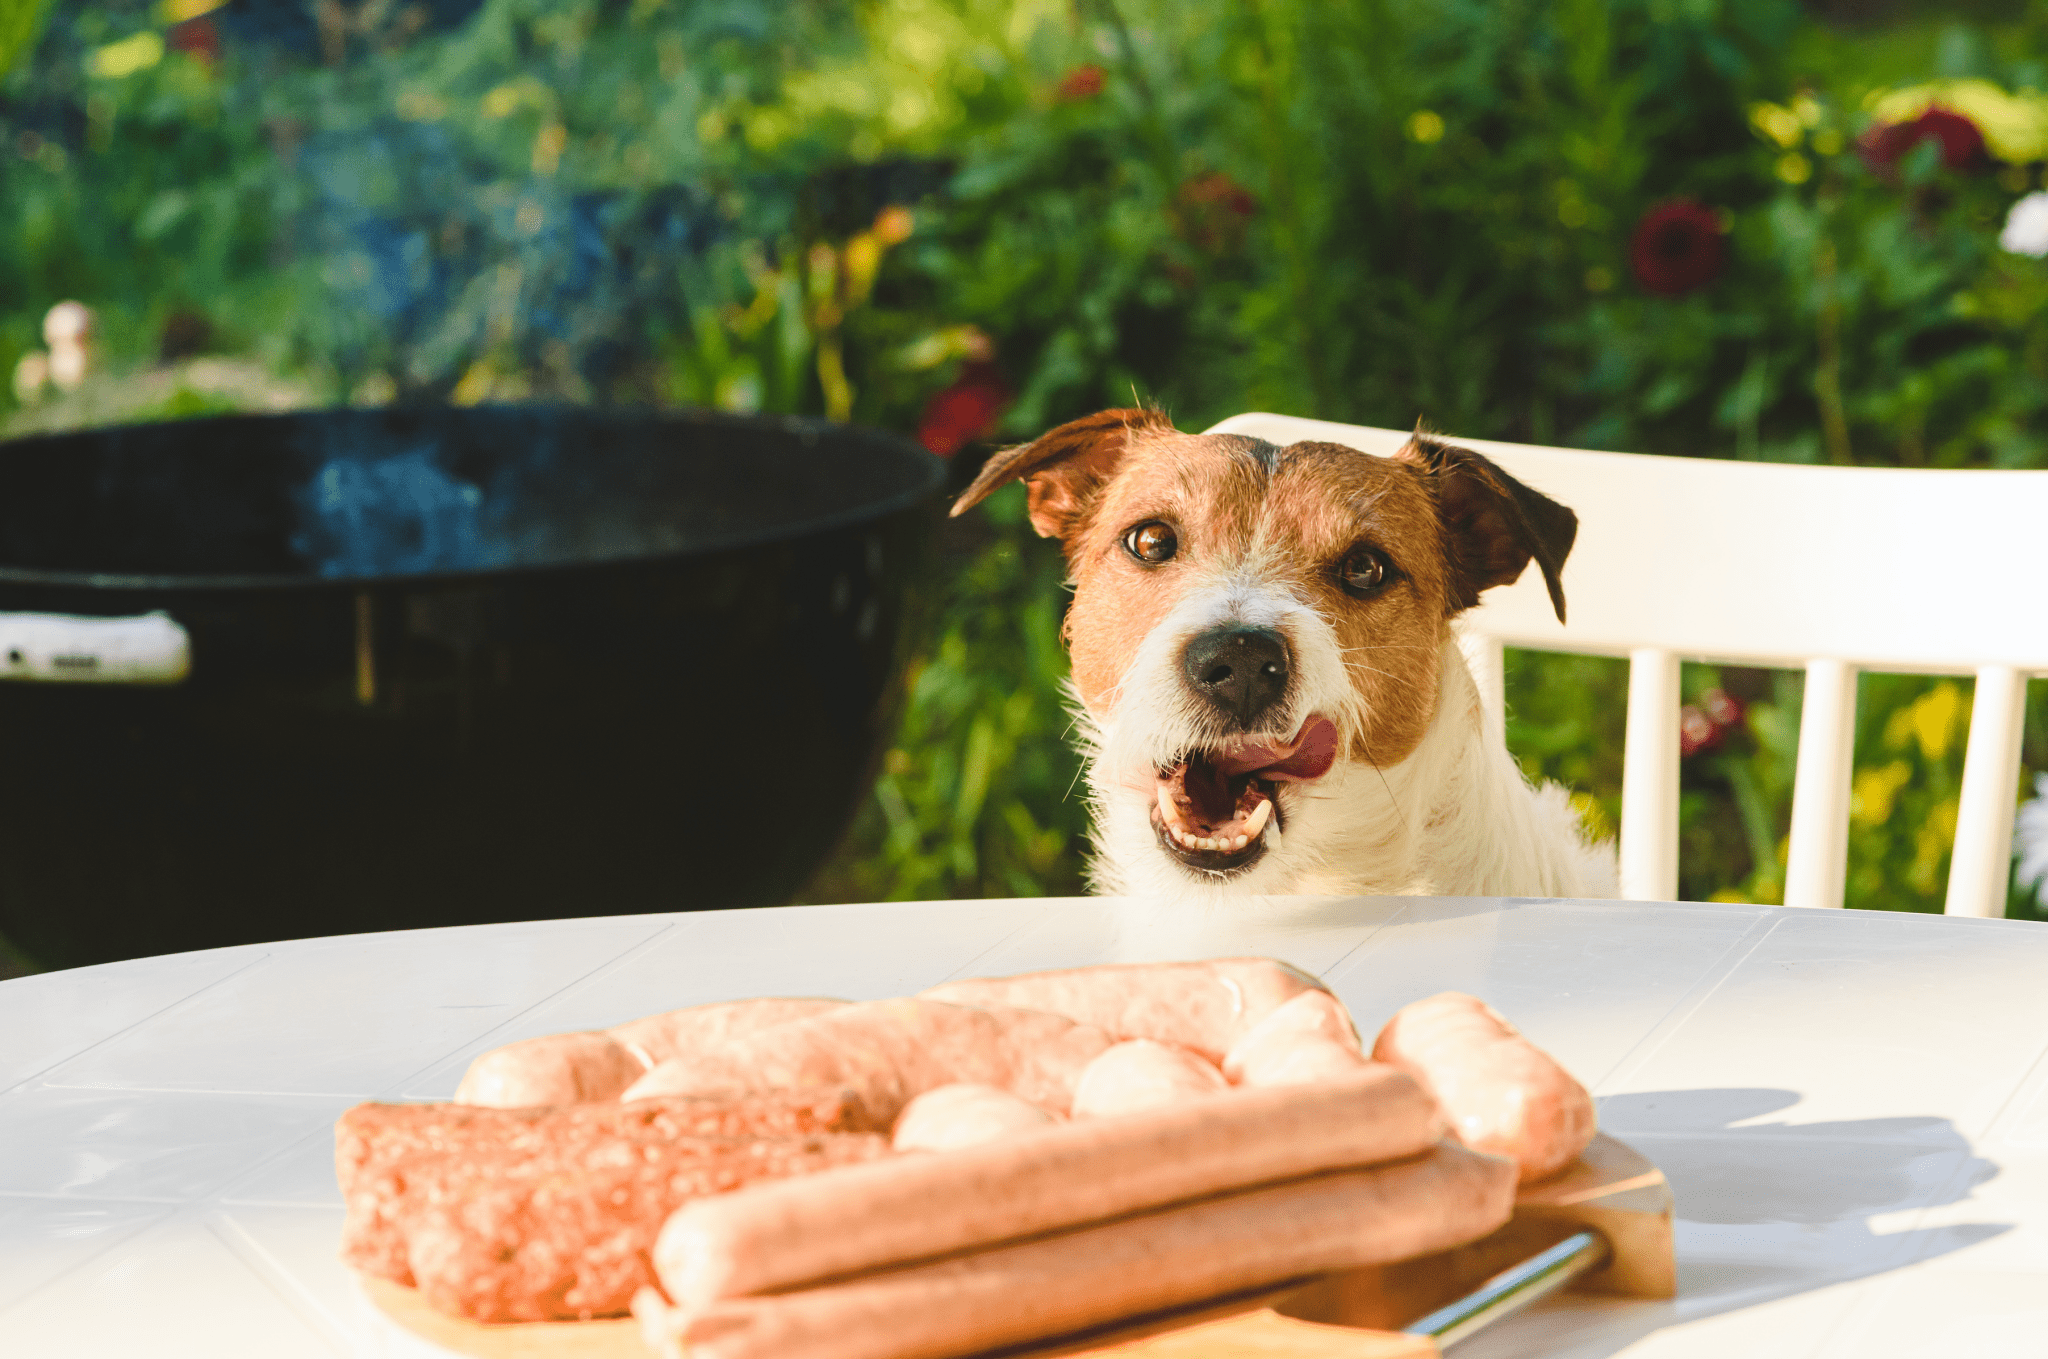 Backyard Grilling Party Tips to Share With Your Dog